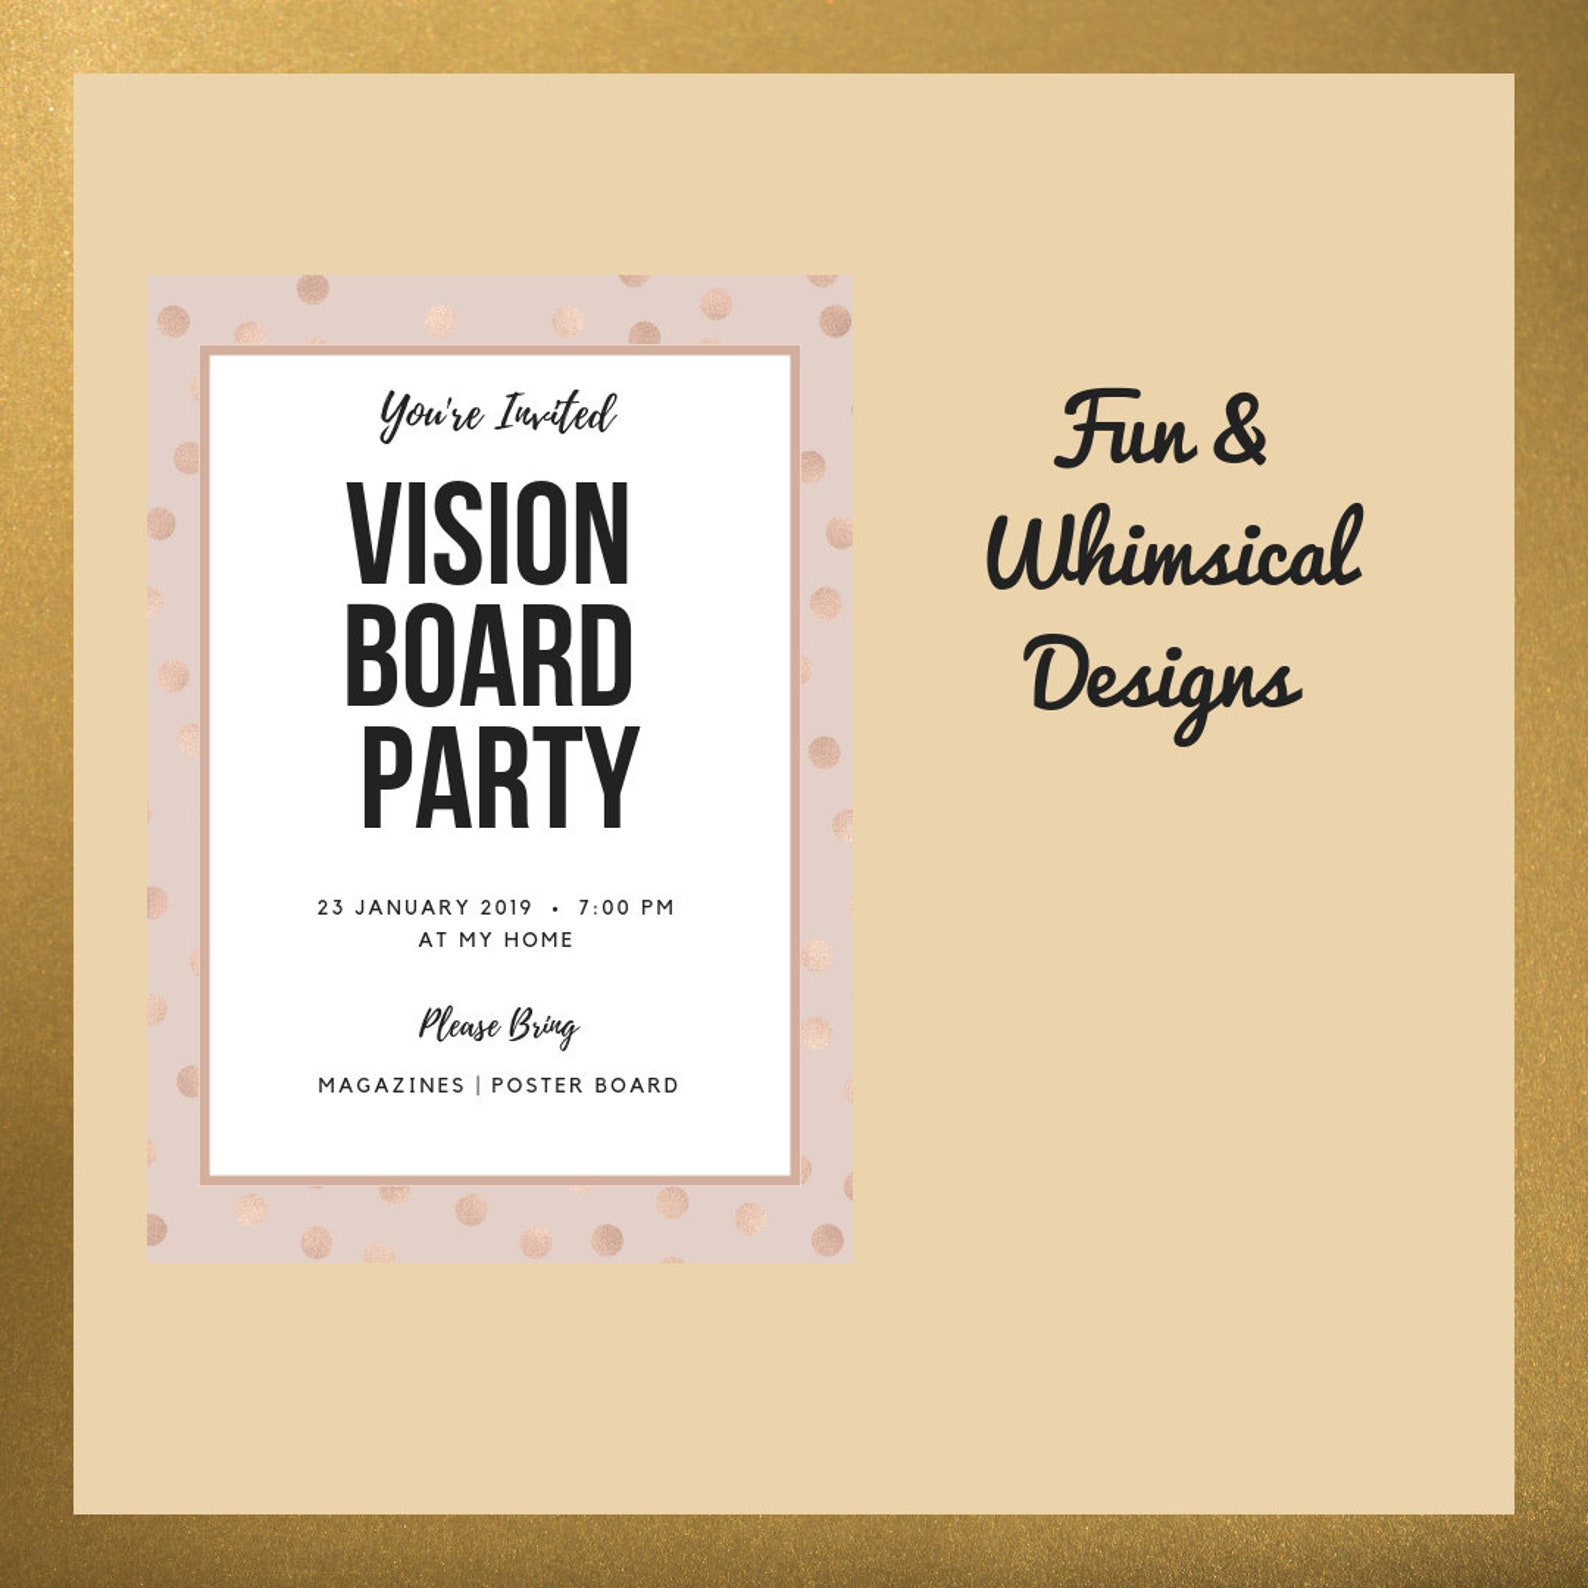 Vision Board Party Invitations Canva Invitations Goal Setting Party ...